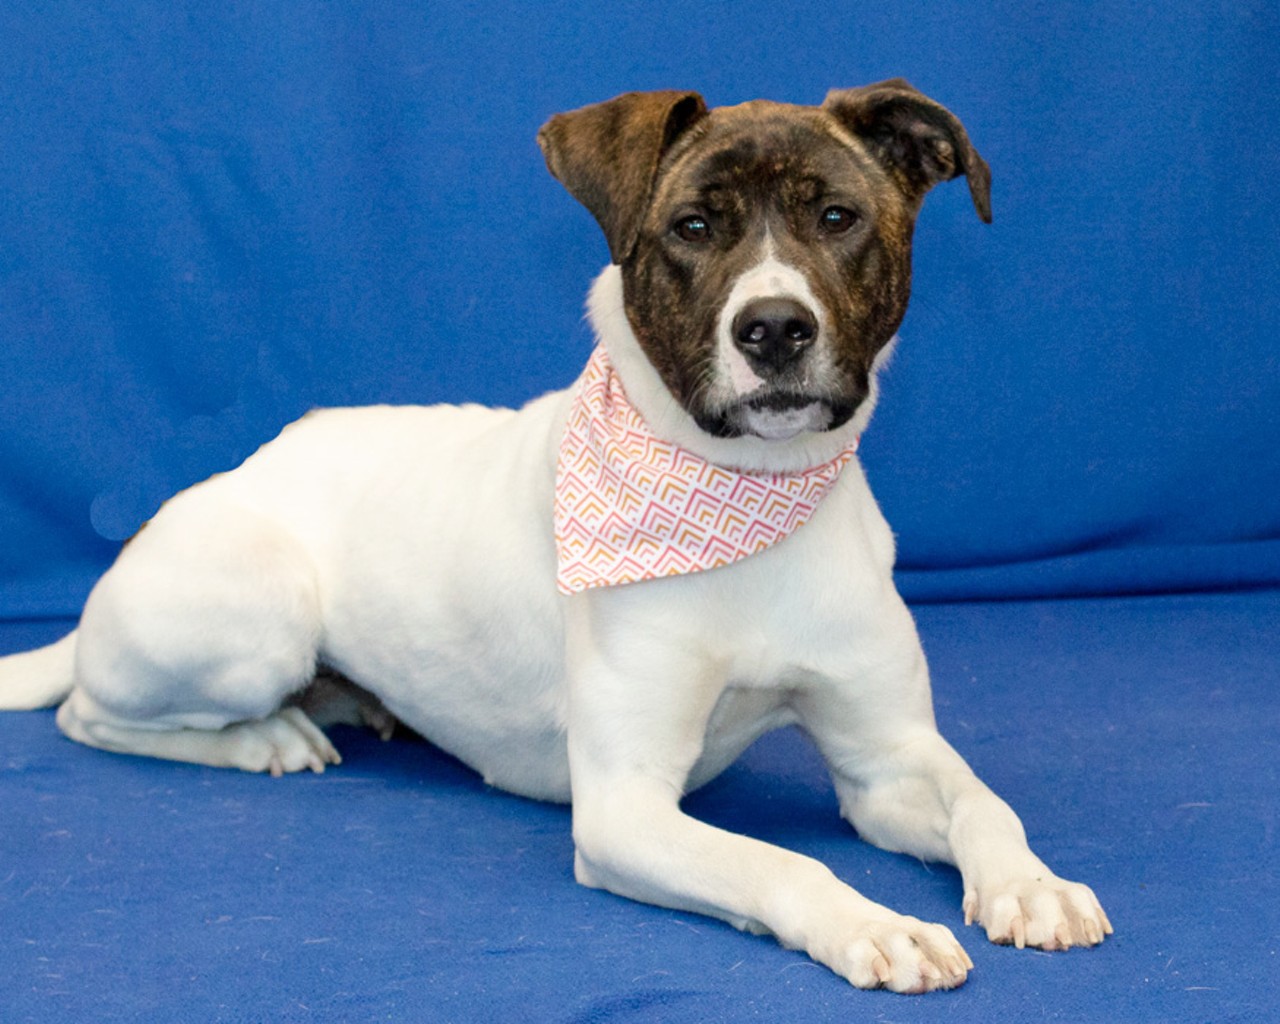 NAME: Lucy
GENDER: Female
BREED: Pit Bull
AGE:  1 year, 6 months
WEIGHT: 37 pounds
SPECIAL CONSIDERATIONS: None
REASON I CAME TO MHS: Rescued in Detroit
LOCATION: Berman Center for Animal Care in Westland
ID NUMBER: 867594